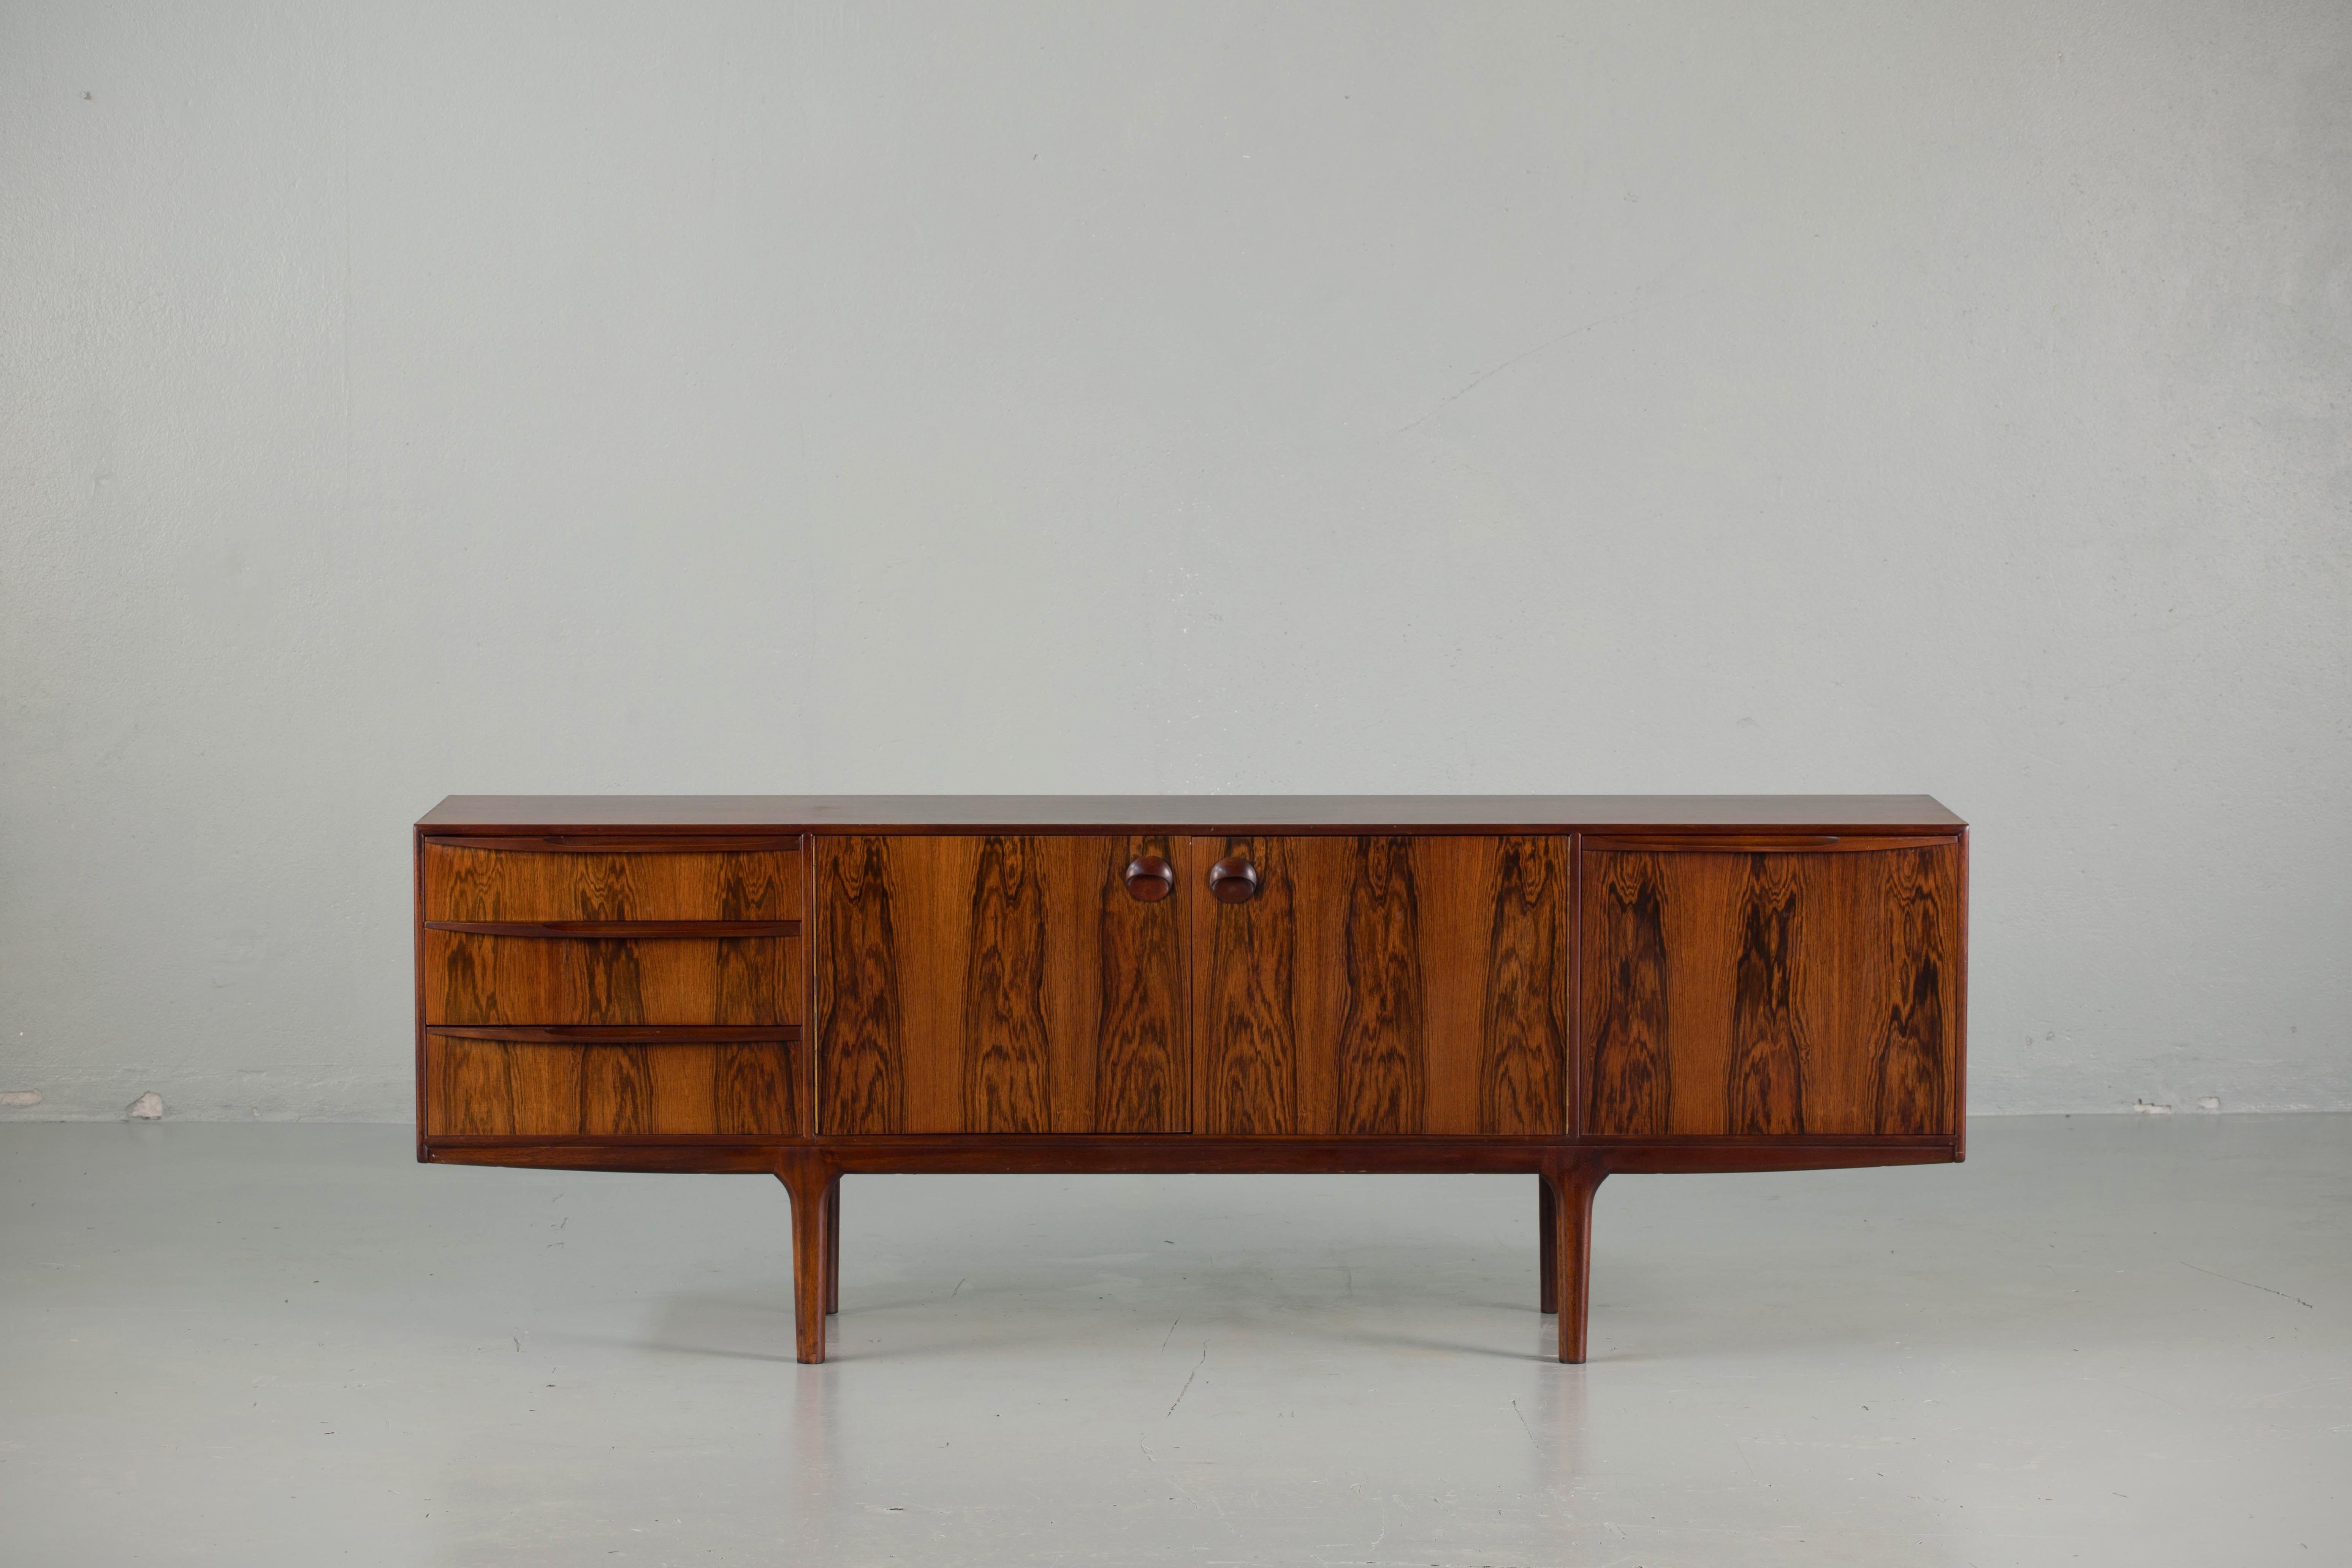 This beautiful vintage modern rosewood sideboard features plenty of room for storage within its three drawers and two large storage compartments hidden by cabinet doors. Sleek two-tone design with unique carved pulls and tapered legs adding to the